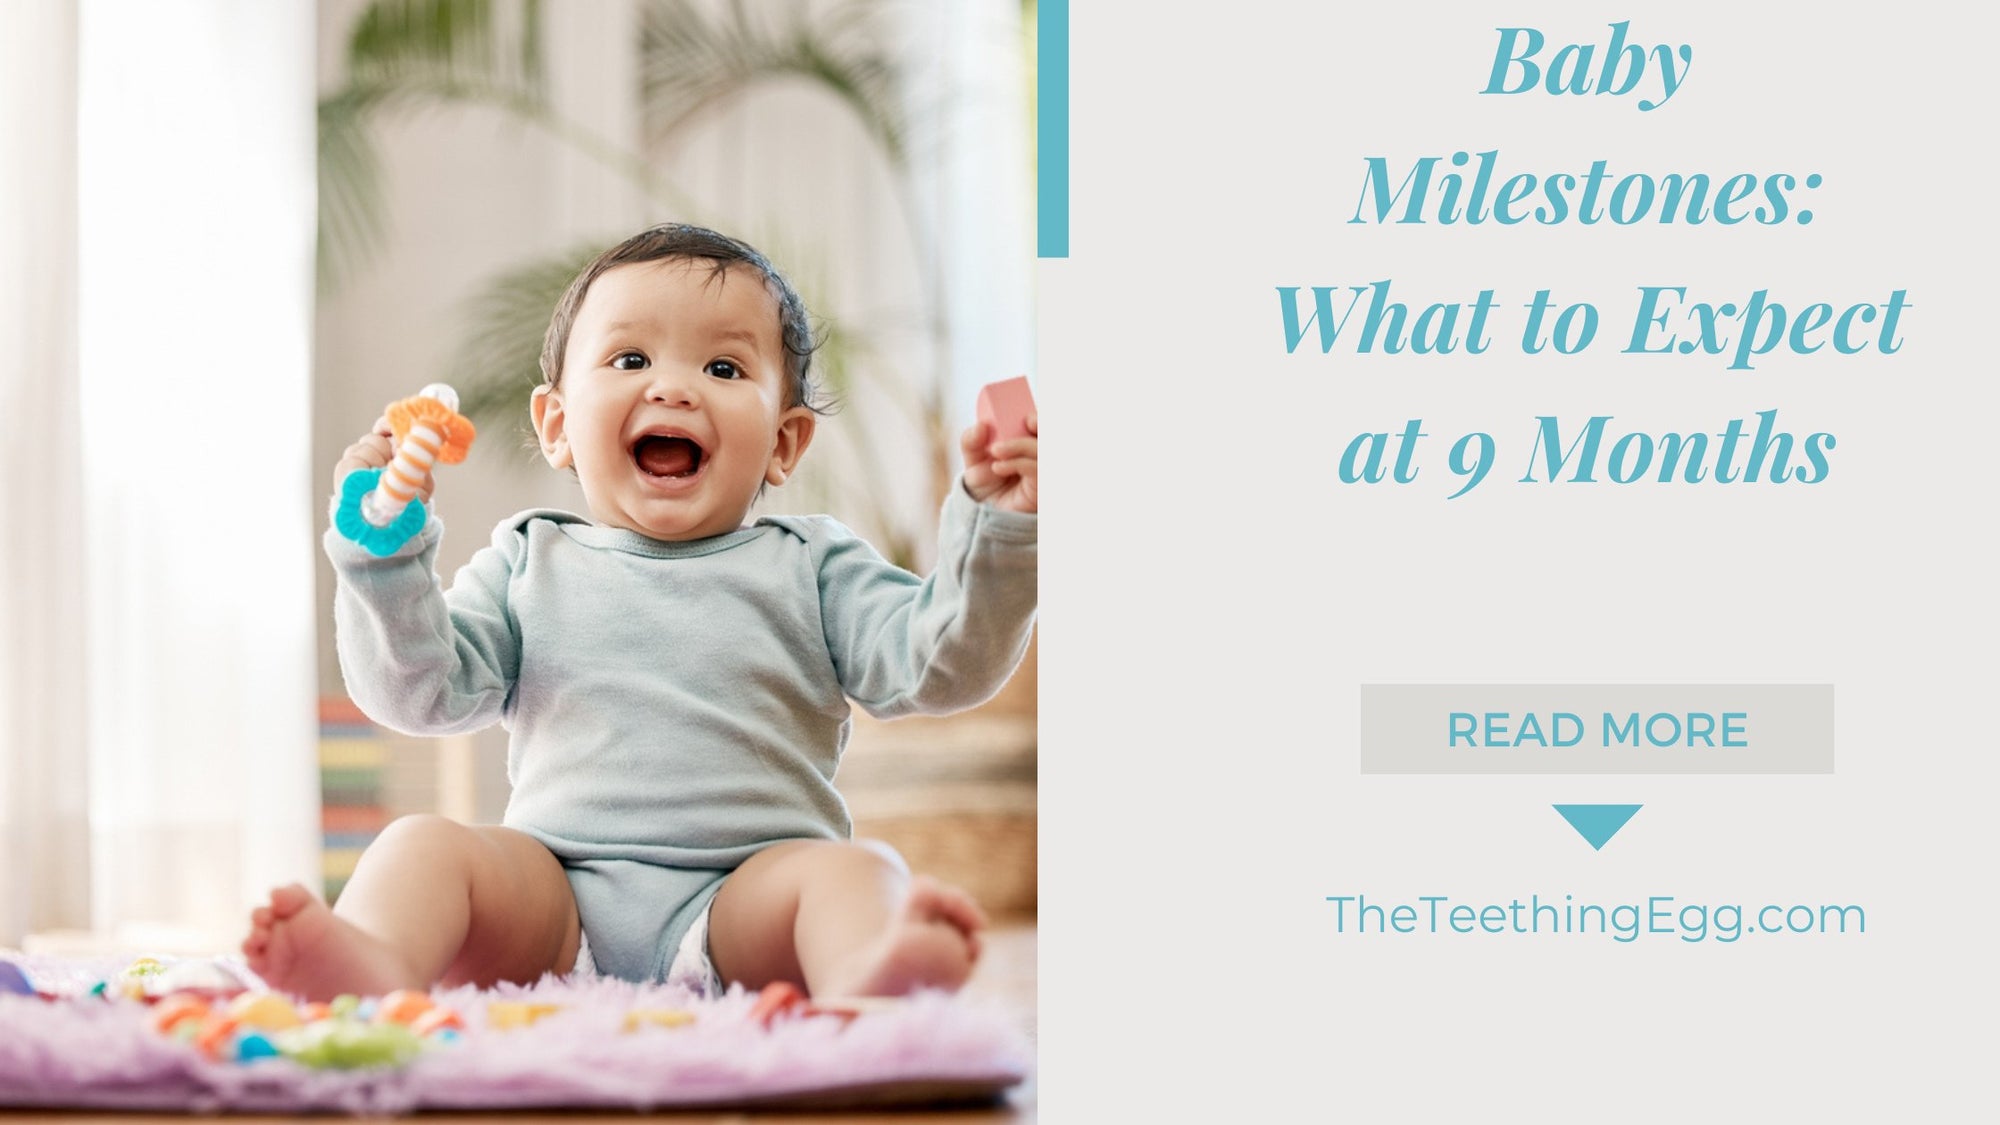 Baby Milestones: What to Expect at 9 Months